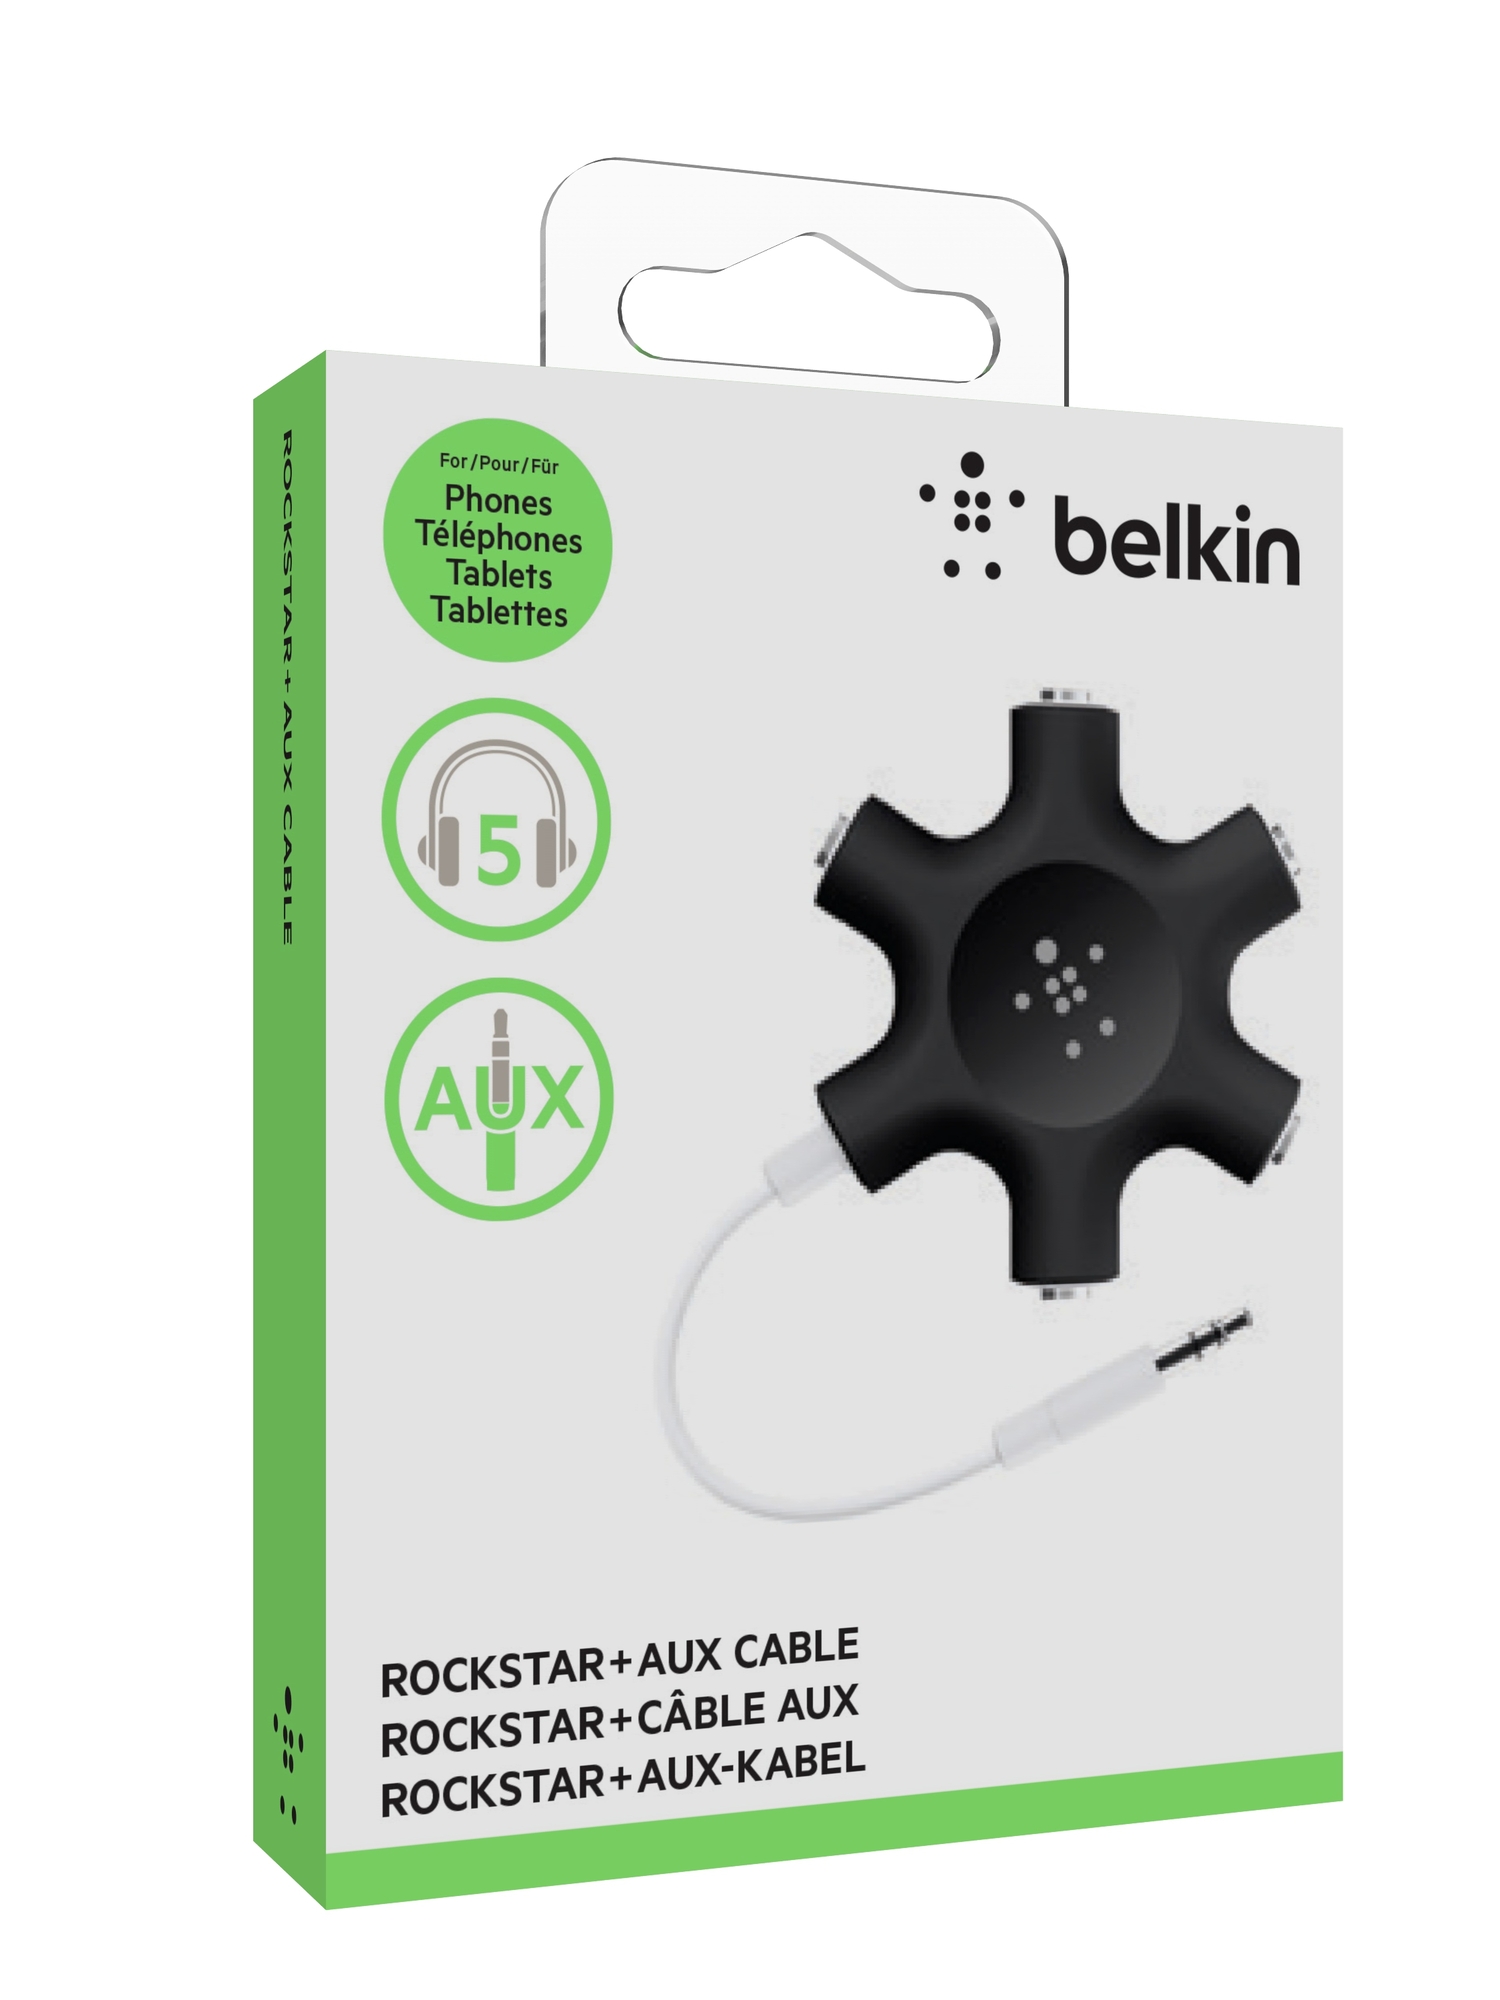 Belkin Rockstar 5-Jack Multi Headphone Audio Splitter - Headphone Splitter Designed To Connect Up To 5 Devices For Classrooms, Audio Mixing & Shared Experiences - For iPhone, iPad & More - image 4 of 5